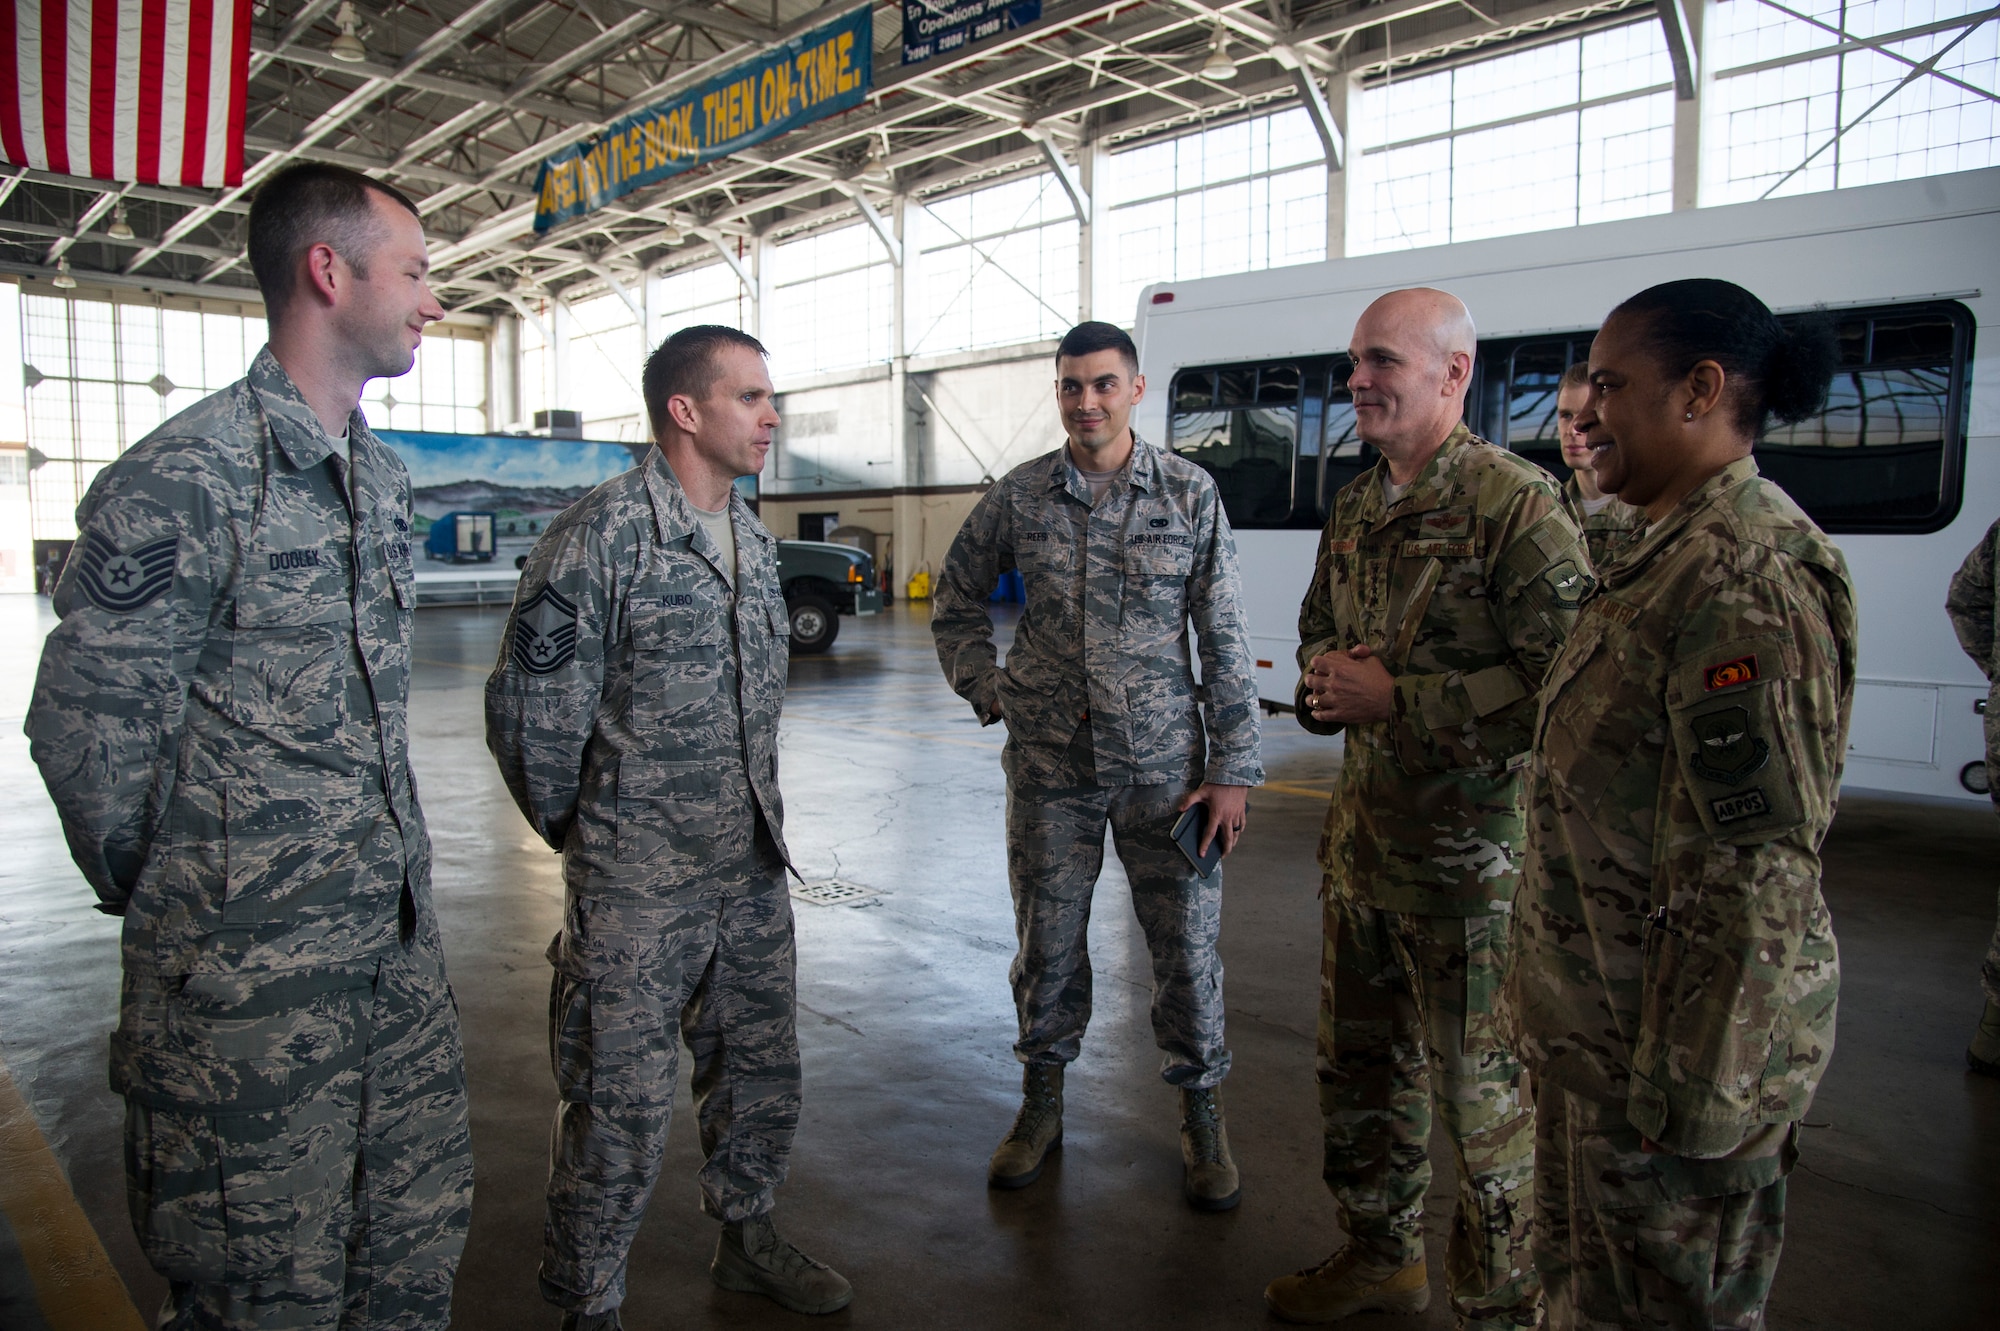 Tech. Sgt. Joseph Dooley, Senior Master Sgt. Shawn Kubo, and 1st Lt. Justin Rees, assigned to the 735th Air Mobility Squadron, brief Gen. Carlton D. Everhart, Air Mobility Command commander, and Chief Master Sgt. Shelina Frey, Air Mobility Command command chief, on infrastructure planning in Hanger 9 at Joint Base Pearl Harbor-Hickam, Feb. 11, 2018. Everhart visited the Airmen of the 515th Air Mobility Operations Wing Feb. 6-12 to better understand how the command can support enroute mobility operations and enable global reach for the joint warfighter. The 515th AMOW, headquartered at Joint Base Pearl Harbor-Hickam, Hawaii, oversees Air Mobility Commands enroute maintenance, command and control and aerial port support operations at 26 locations across 100 million square miles in the Pacific. (U.S. Air Force photo by Tech. Sgt. Heather Redman)